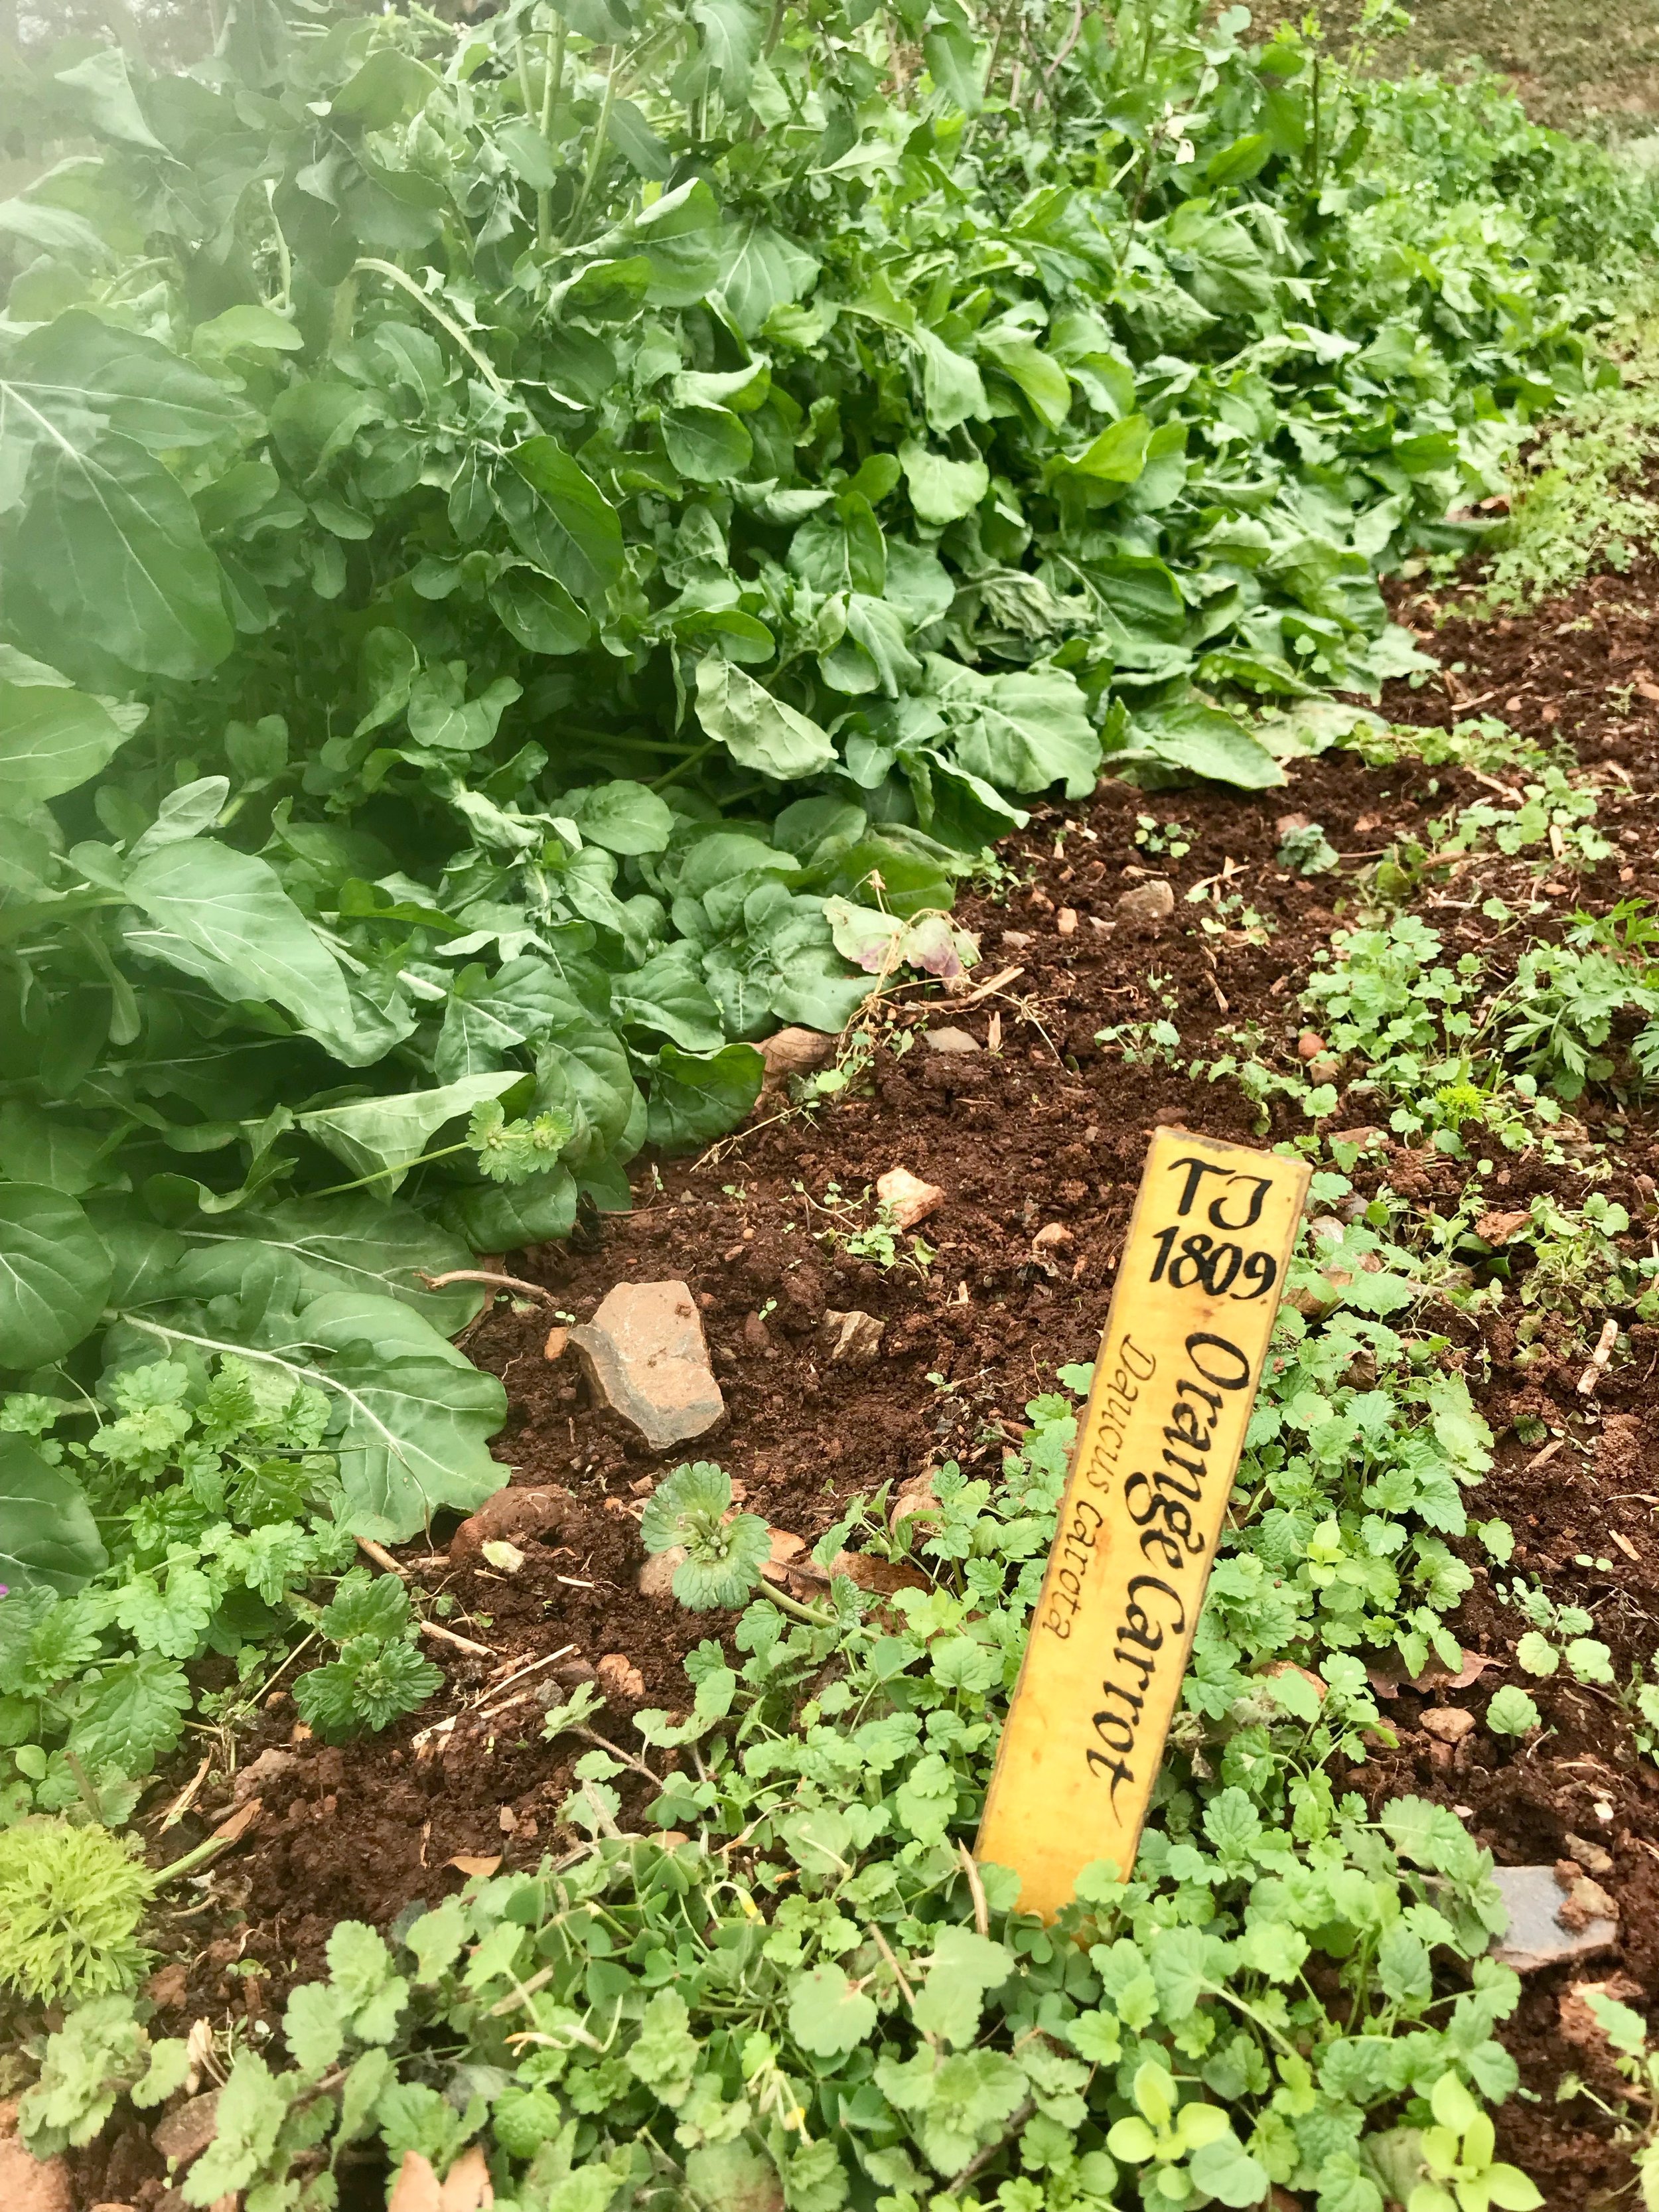  Thomas Jefferson studied horticulture and experimented in his own vegetable garden. Strains he first planted are marked with his initials at his Monticello home.      